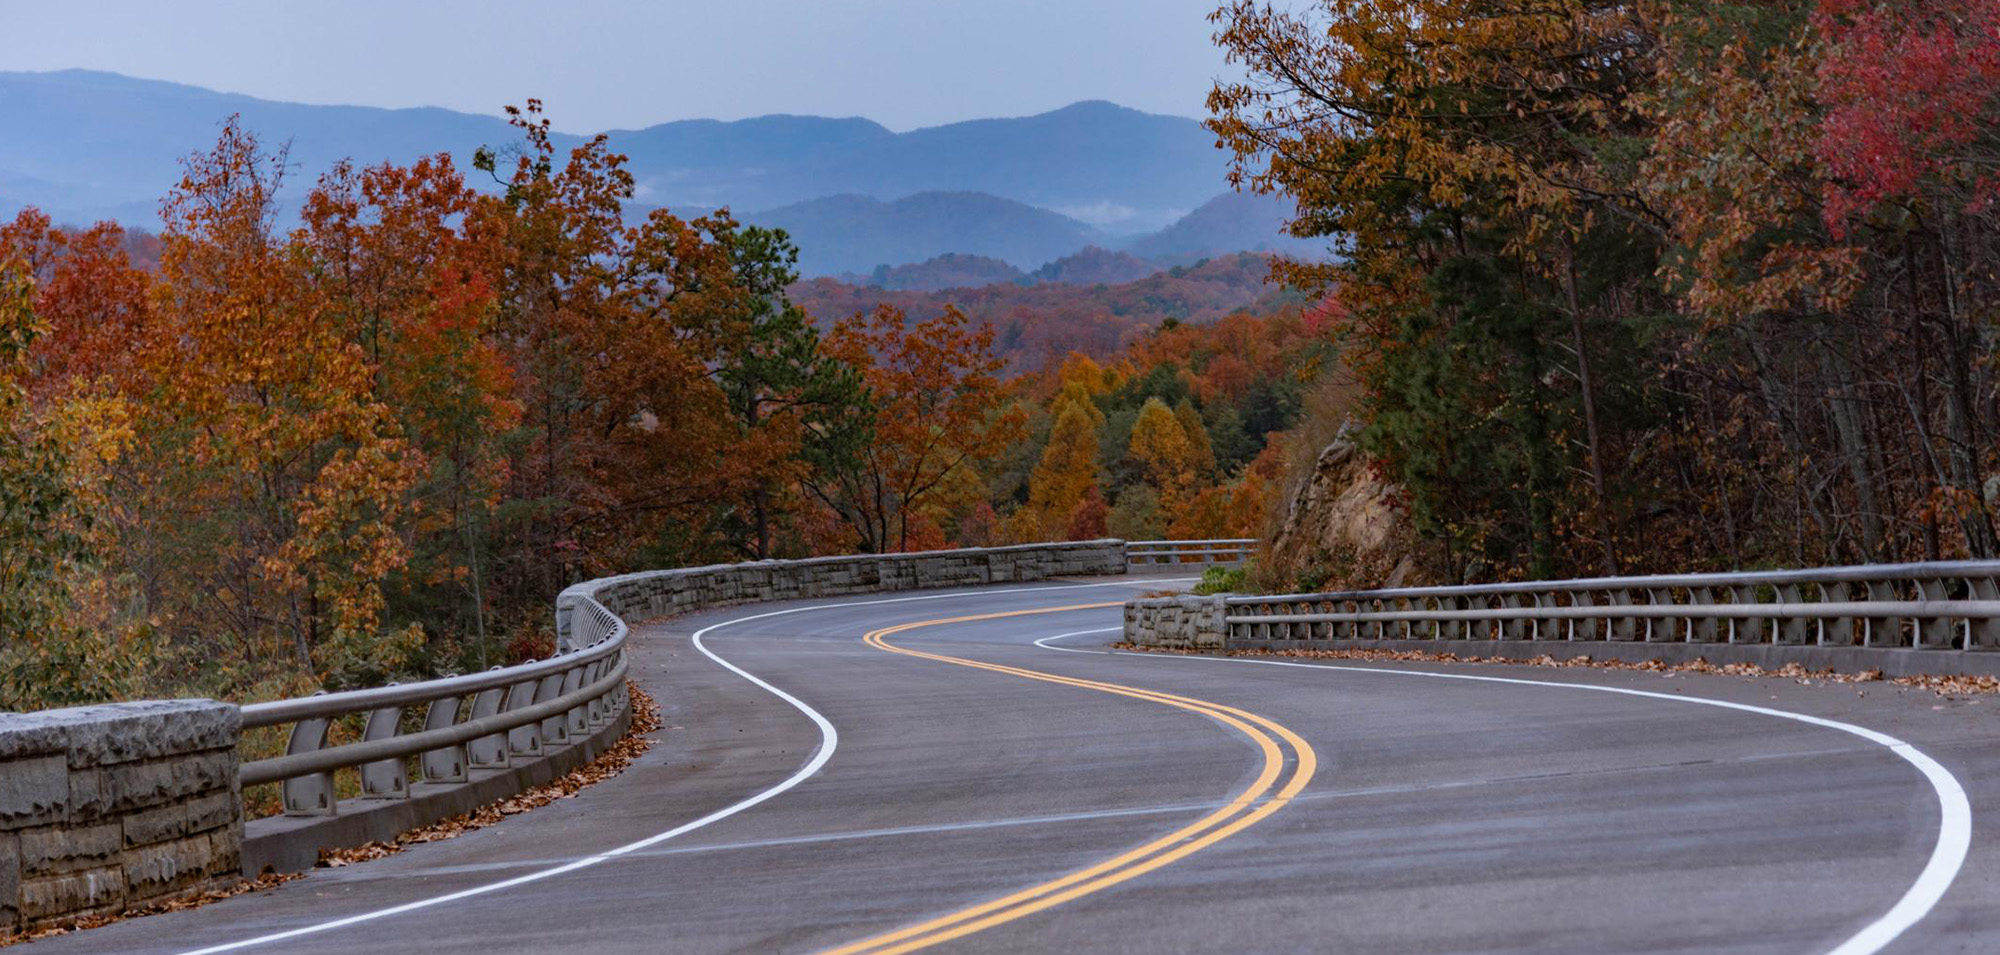 Foothills Parkway in the Great Smoky Mountains National Park